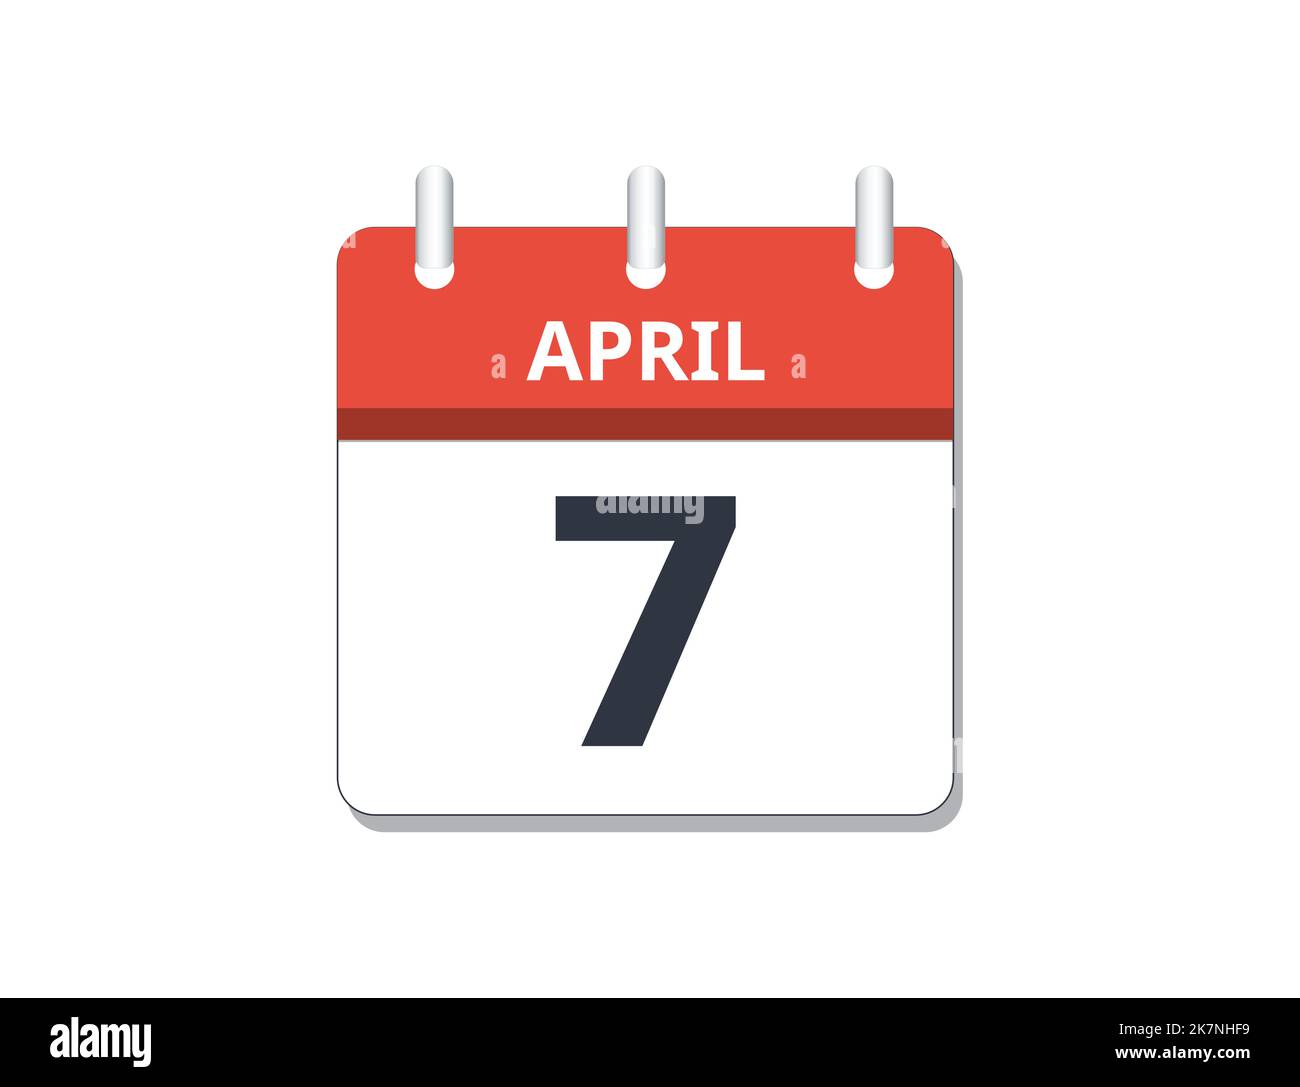 April 7th calendar icon vector. Concept of schedule, business and tasks Stock Vector